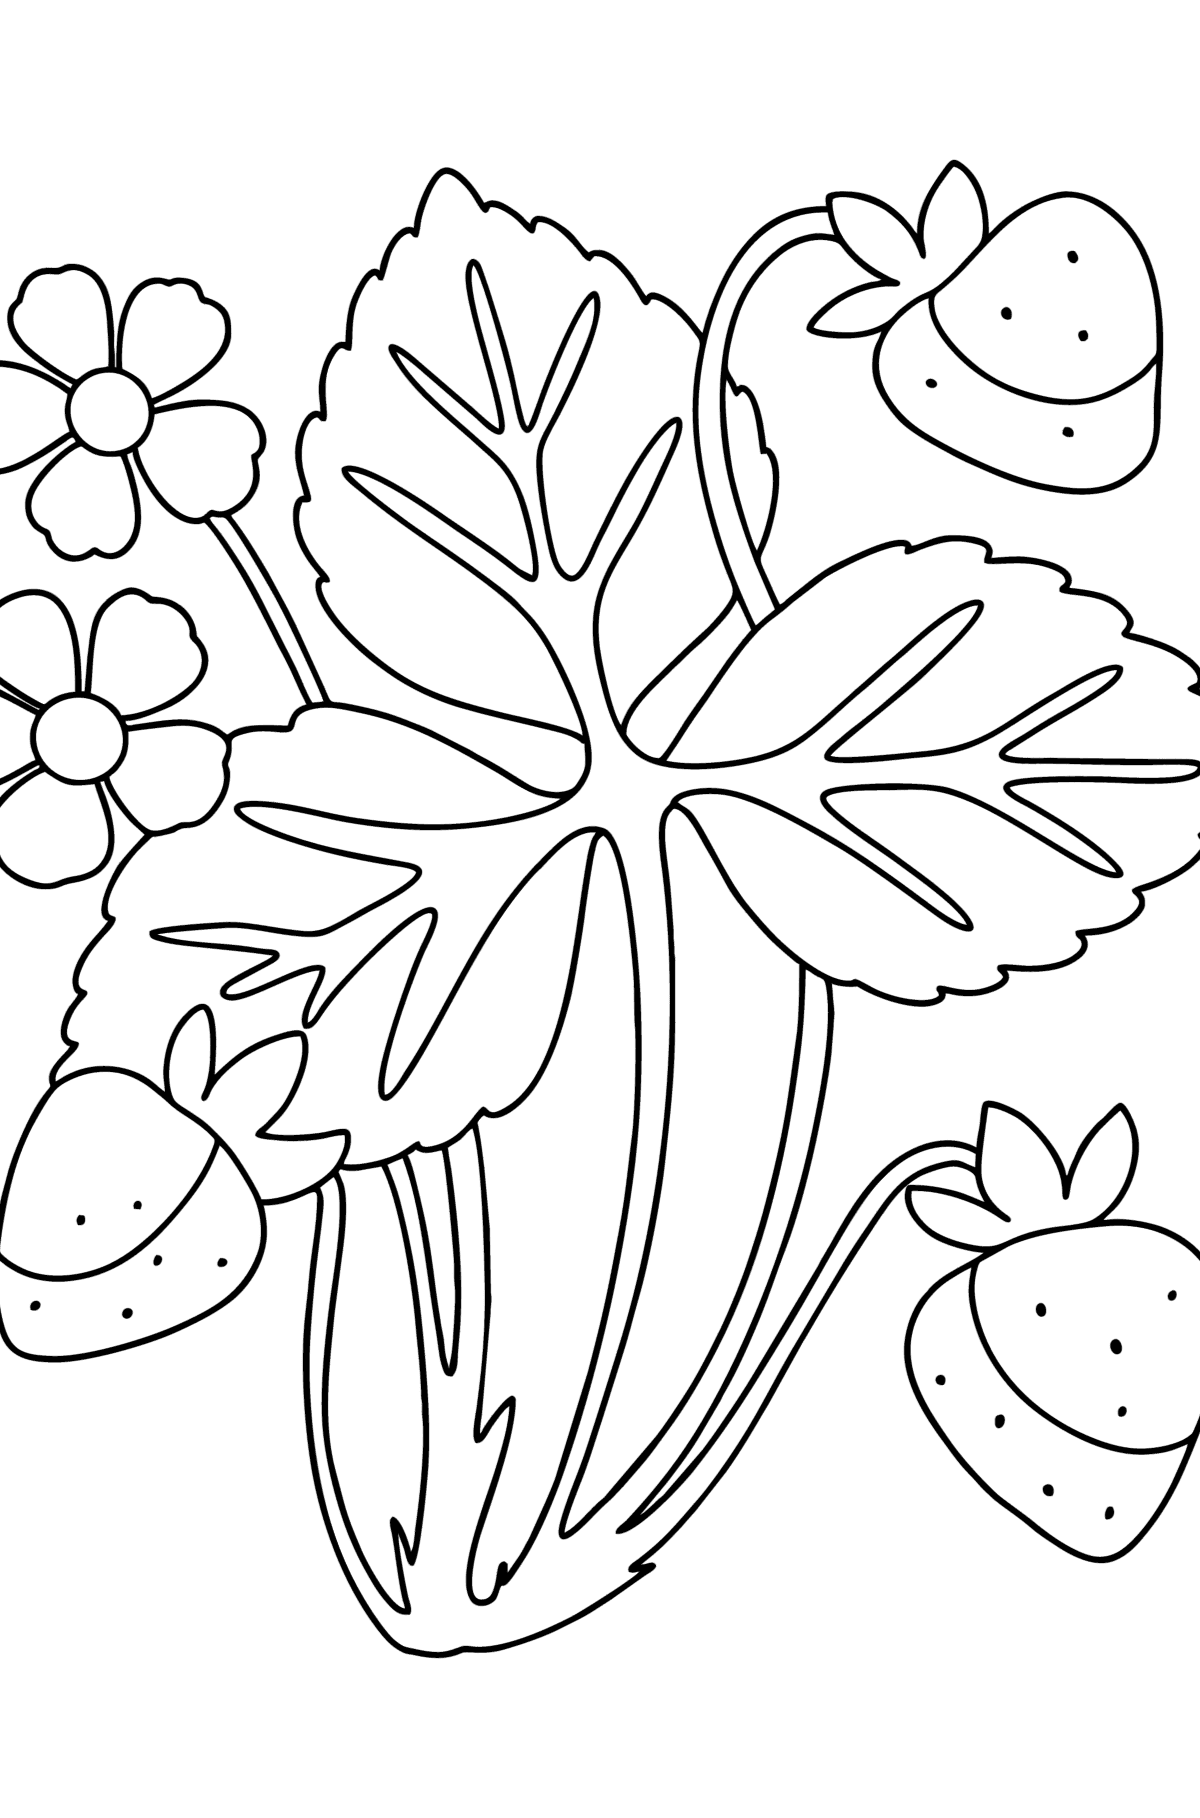 Strawberry bush сoloring page - Coloring Pages for Kids